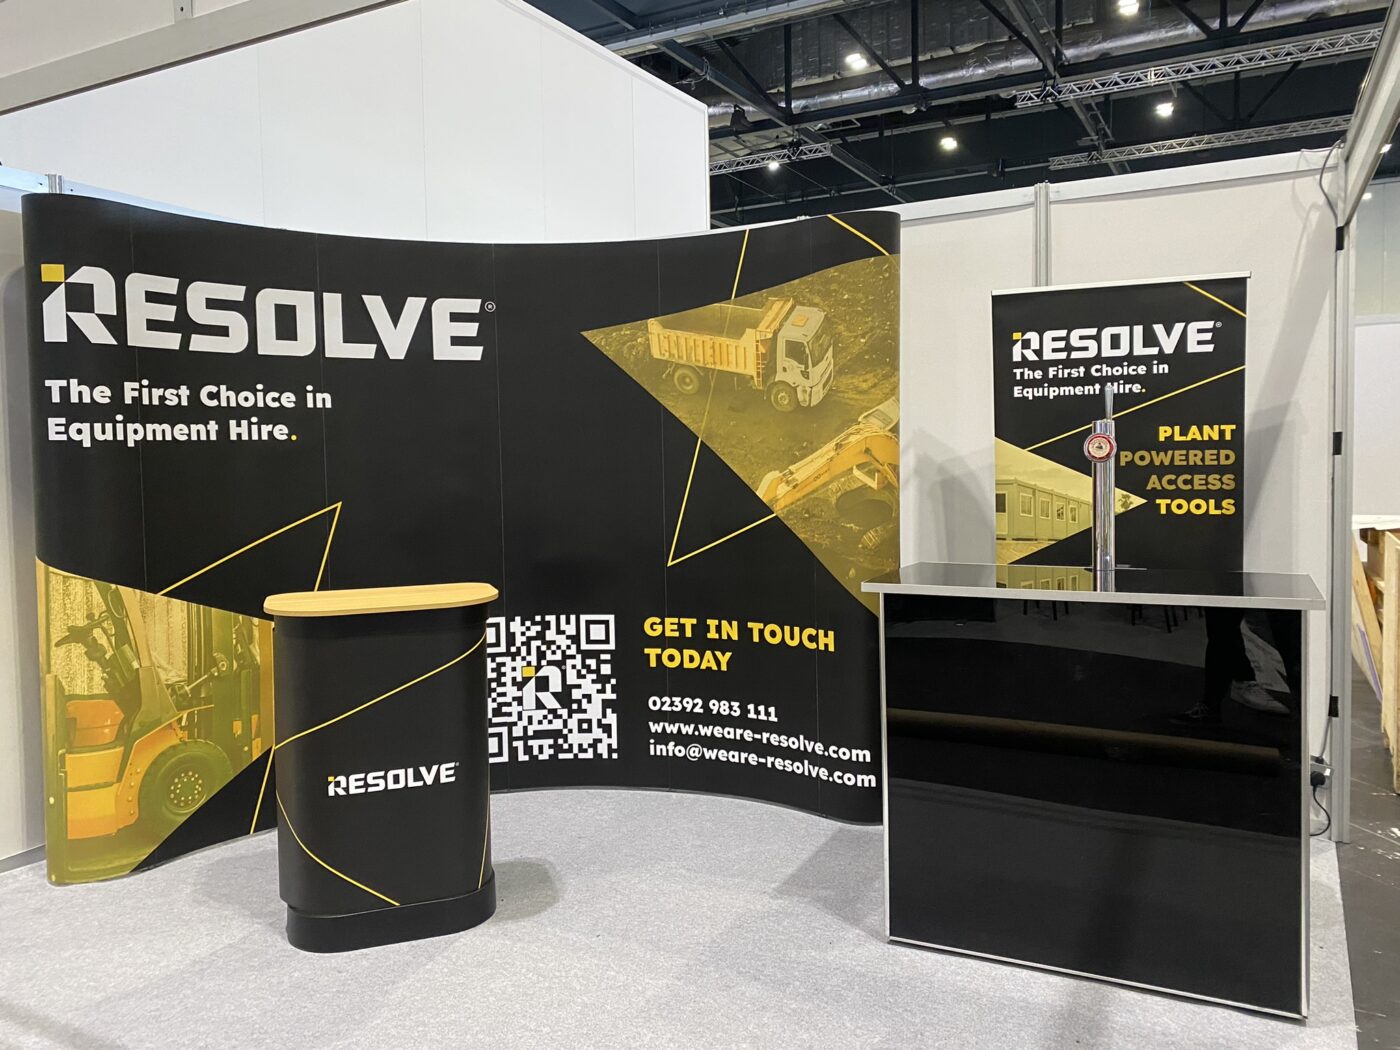 Trade show booth for "Resolve," featuring black and yellow displays with images of heavy equipment and contact information, including a QR code.